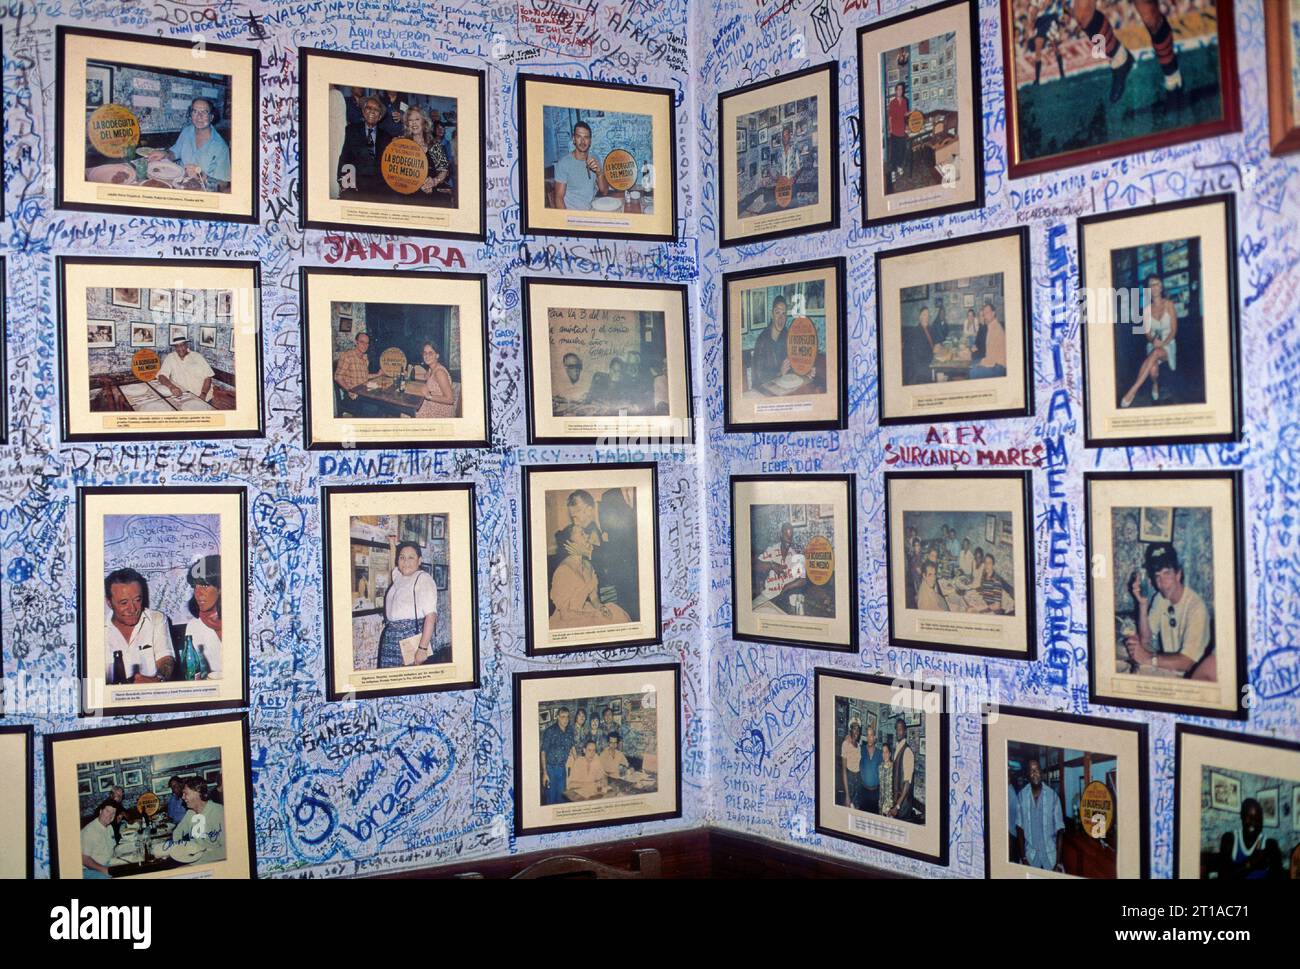 Cuba Havana La Bodeguita del Medio the interior of the place with the walls covered with photos of illustrious frequenters and signatures of visitors Stock Photo